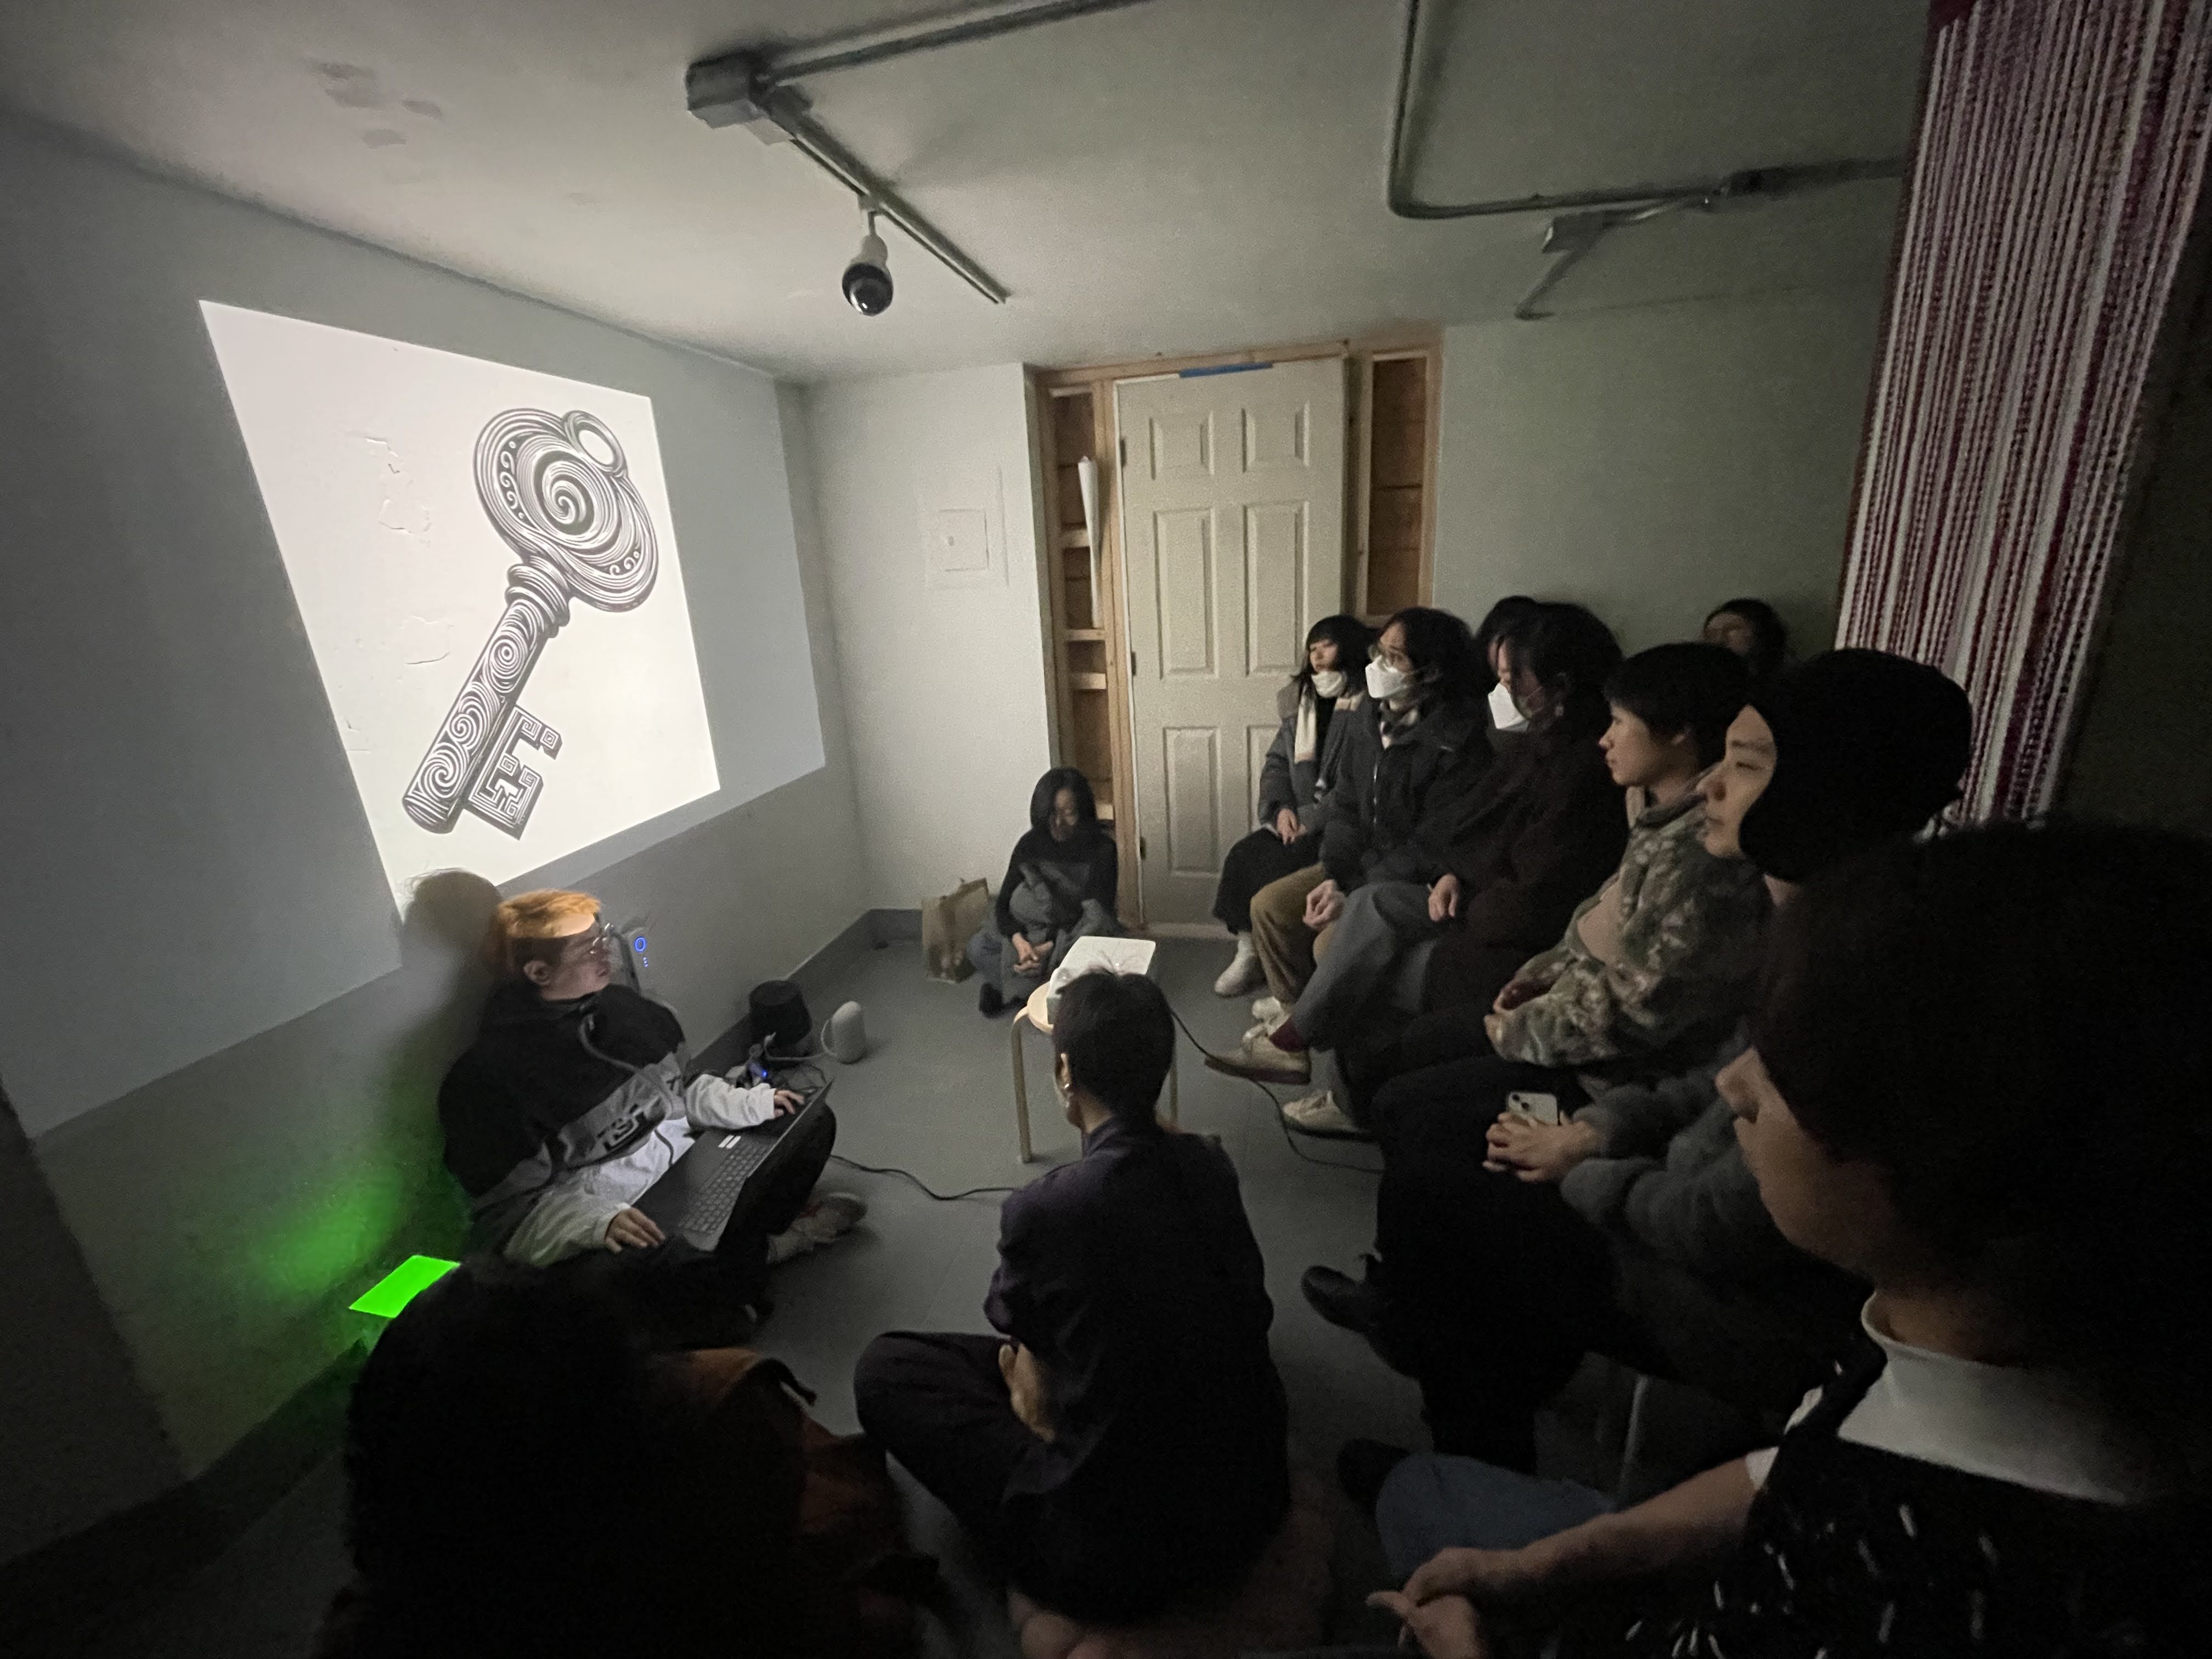 Zhenzhen Qi Leading the Collaborative Worldbuilding, with the Real-Time Generated Symbols Projected onto the Wall